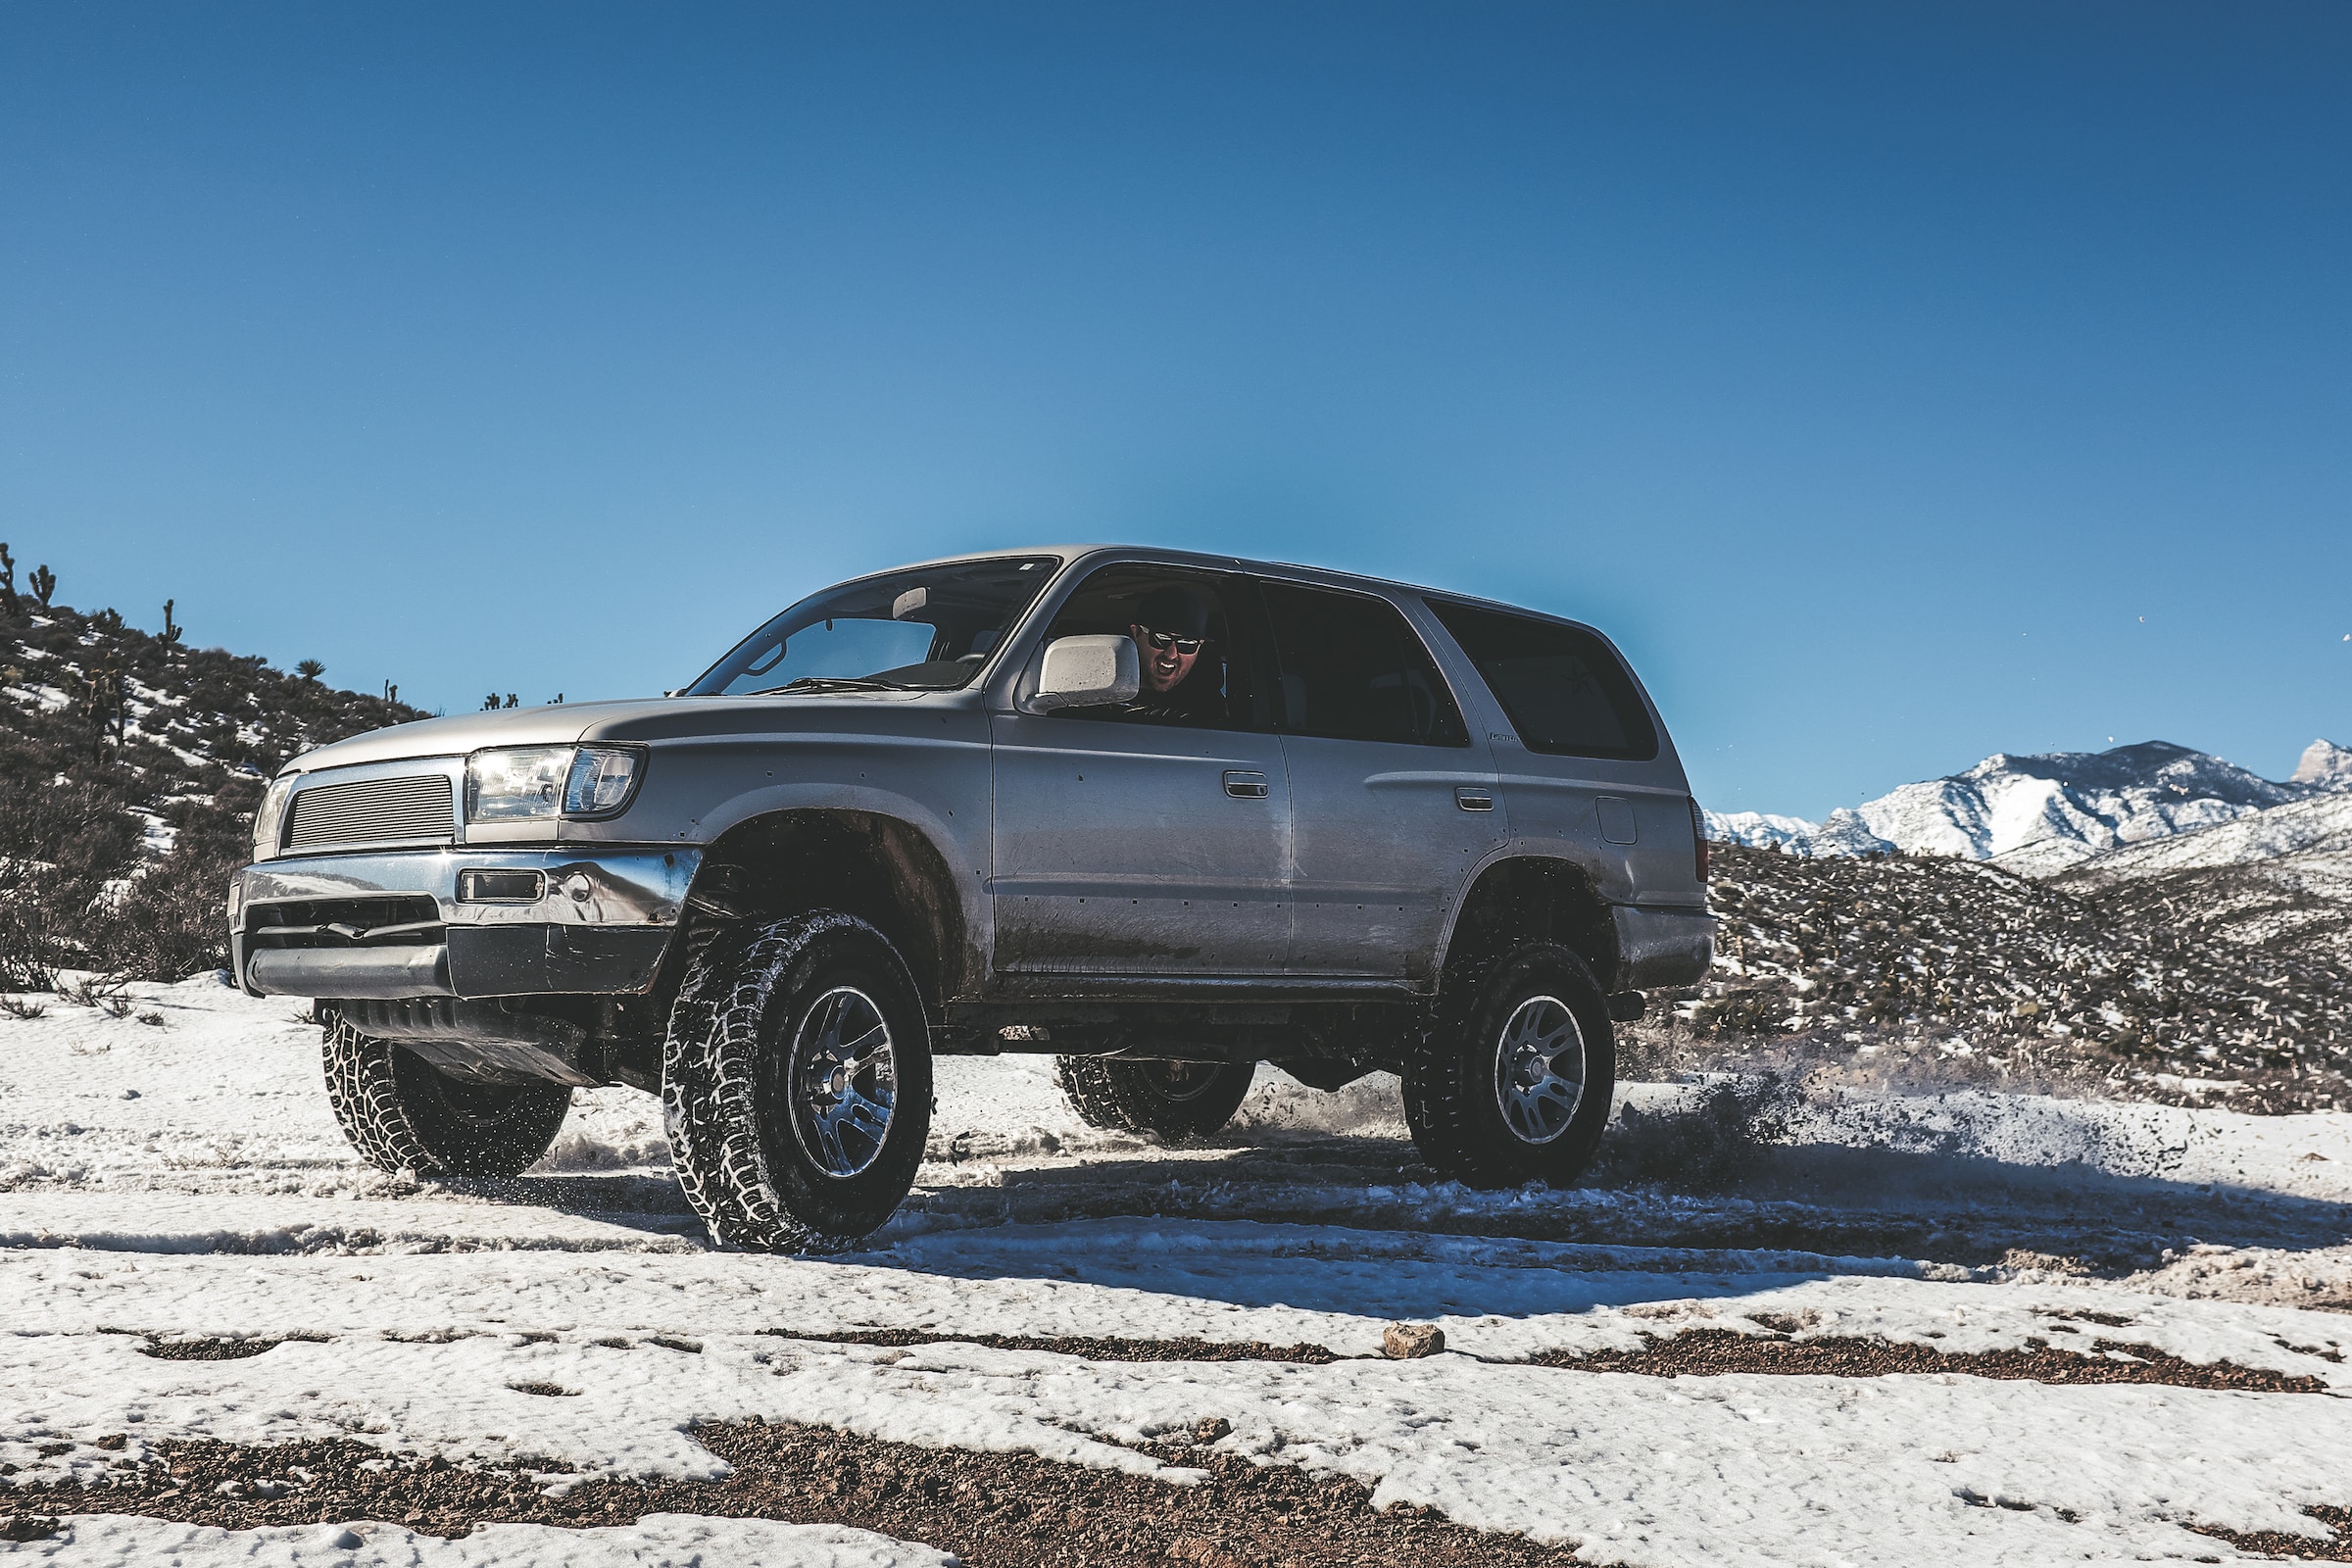 All About Drivetrains: Exploring FWD, RWD, AWD, and 4WD